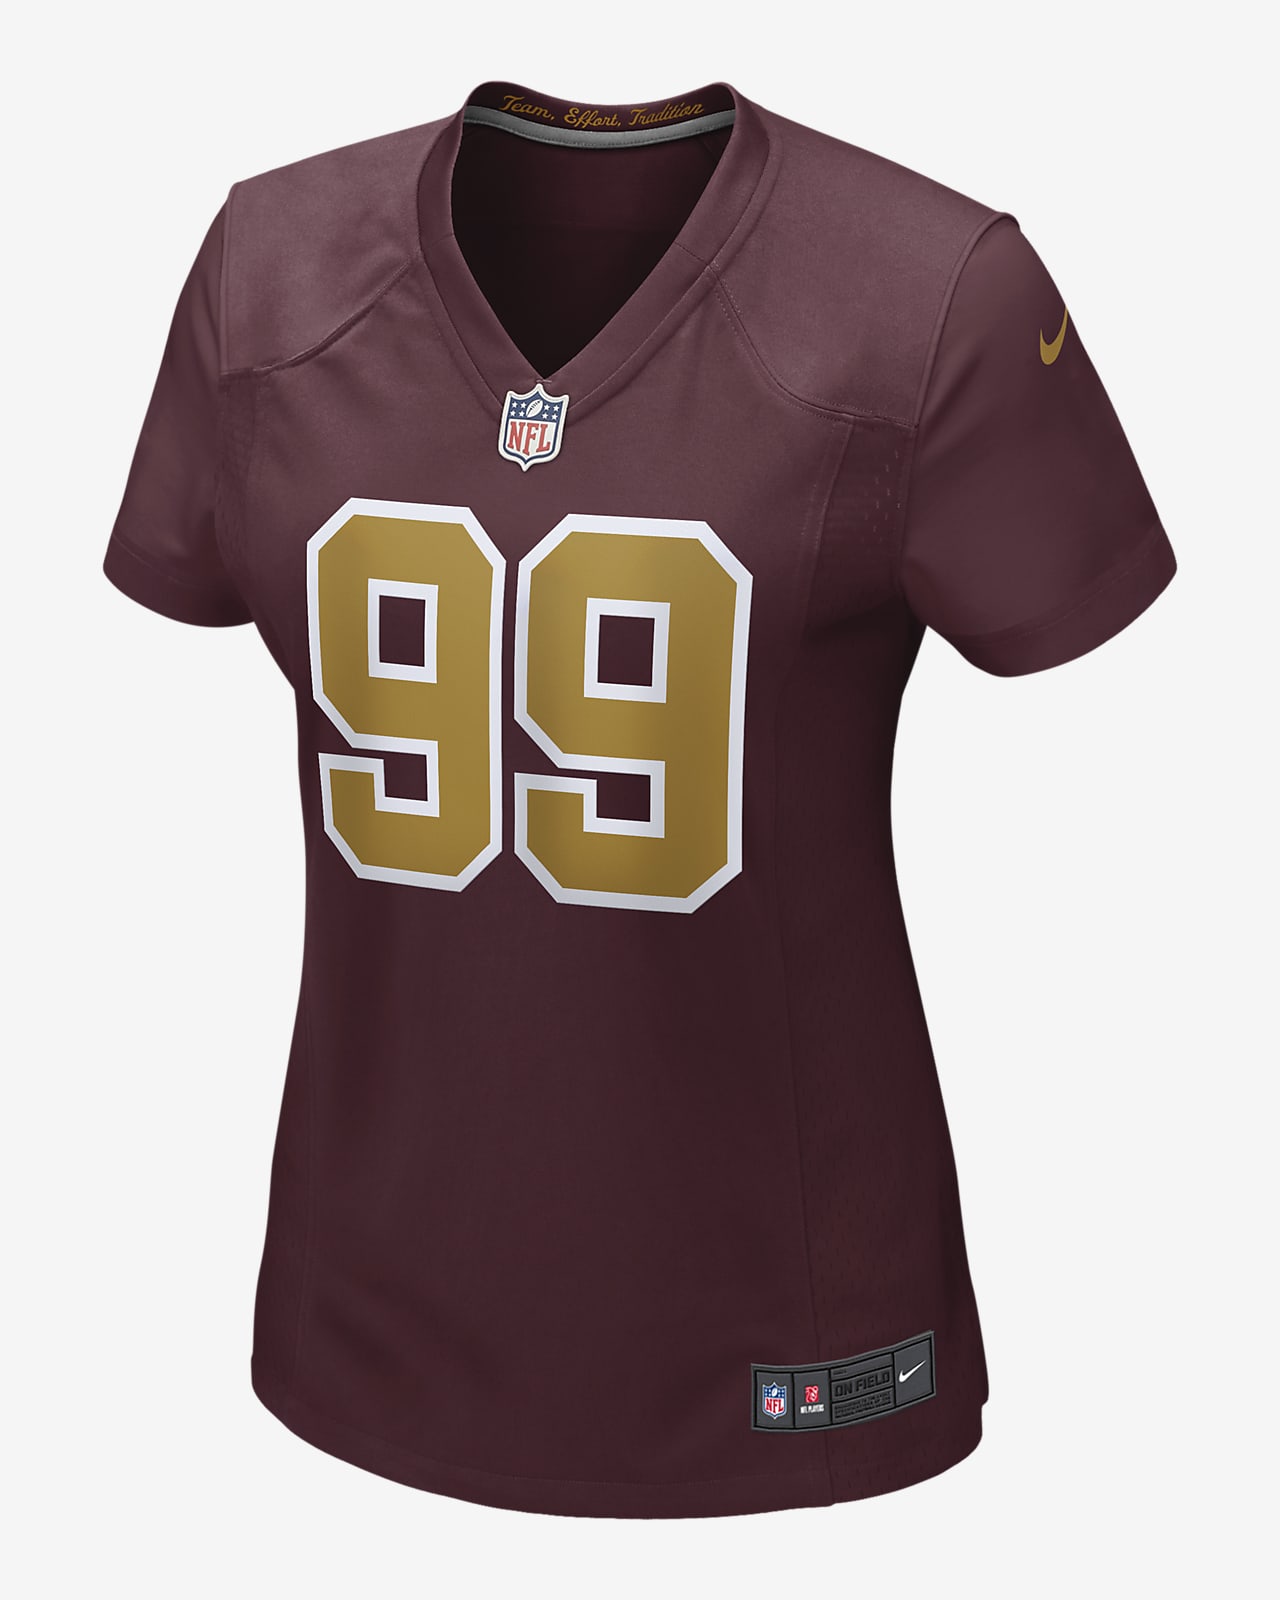 NFL Washington Football Team (Chase Young) Women's Game Football Jersey